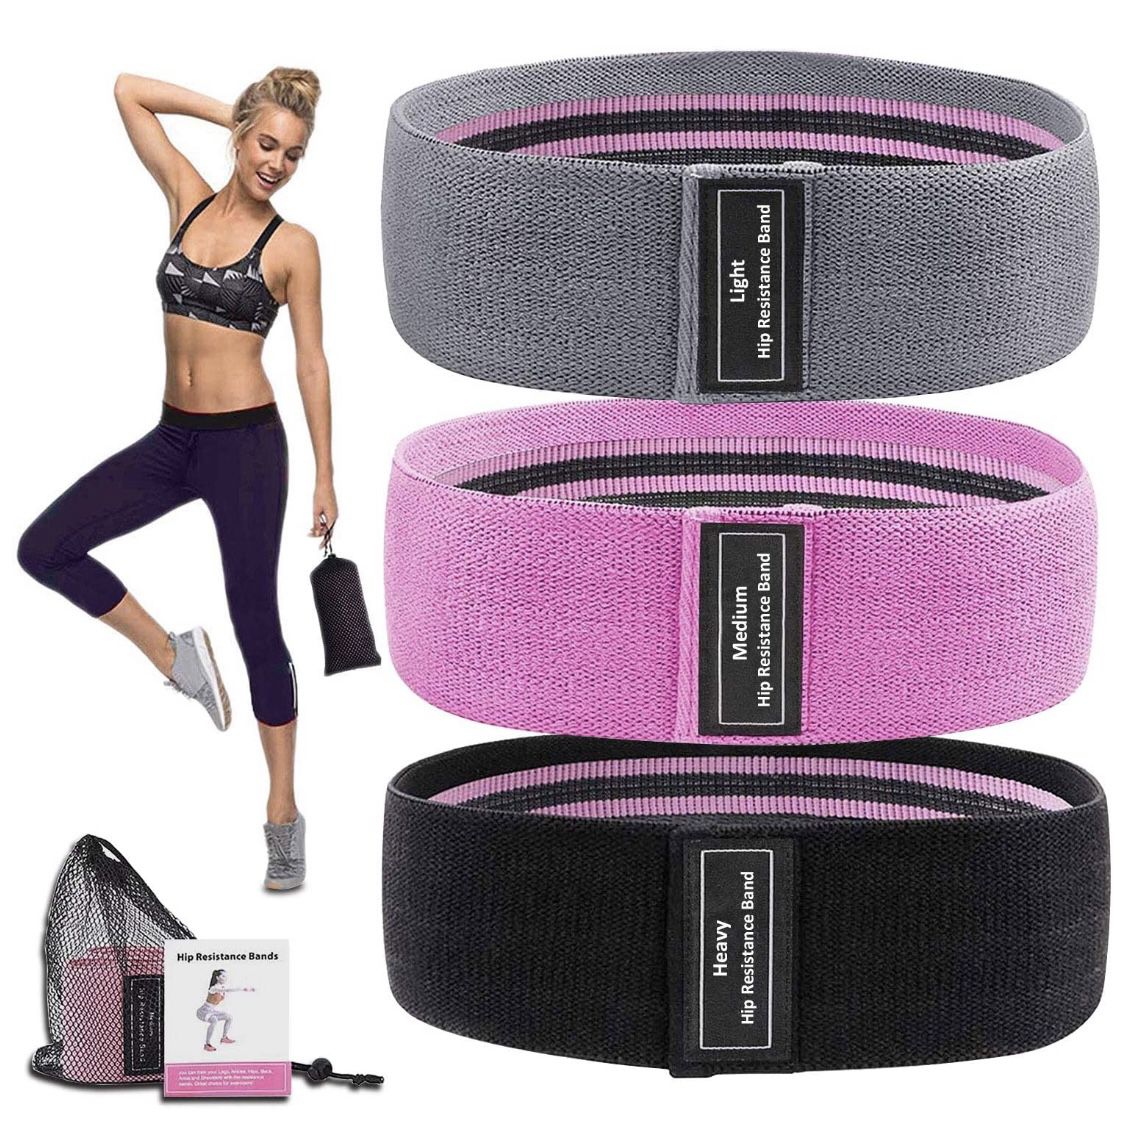 MOVOYEE Exercise Bands for Working Out Men Women,Workout Elastic Bands Long Fabric Body Resistance Bands Thick Set 3 Loop Fitness Equipment Fit Home